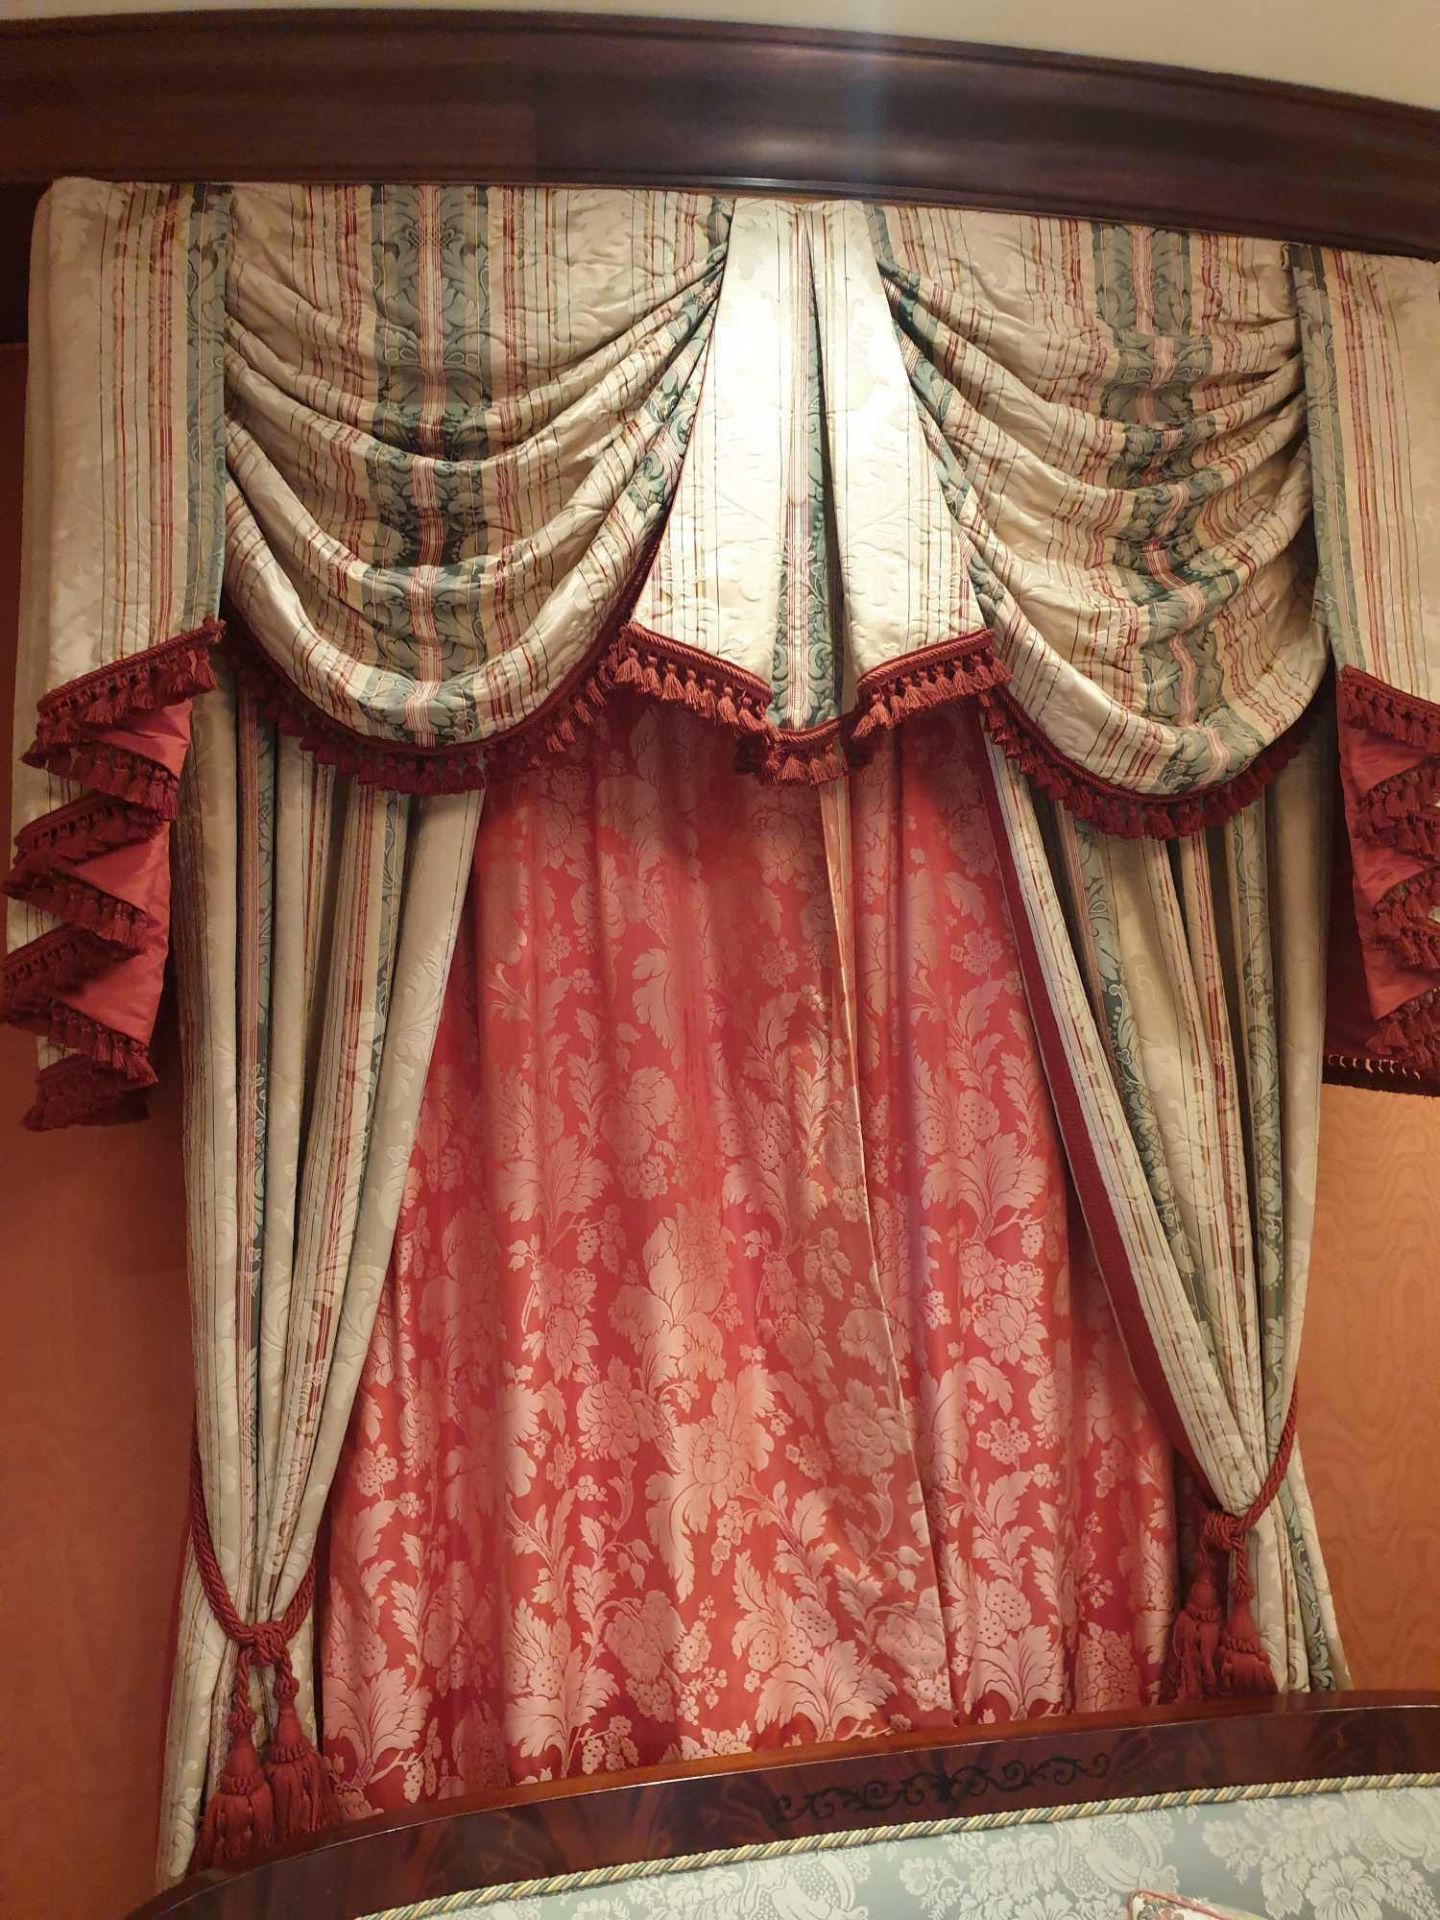 A Pair Of Cream Silk Drapes With Swags And Jabots In Gold Green And Pink Detail With Tassels And